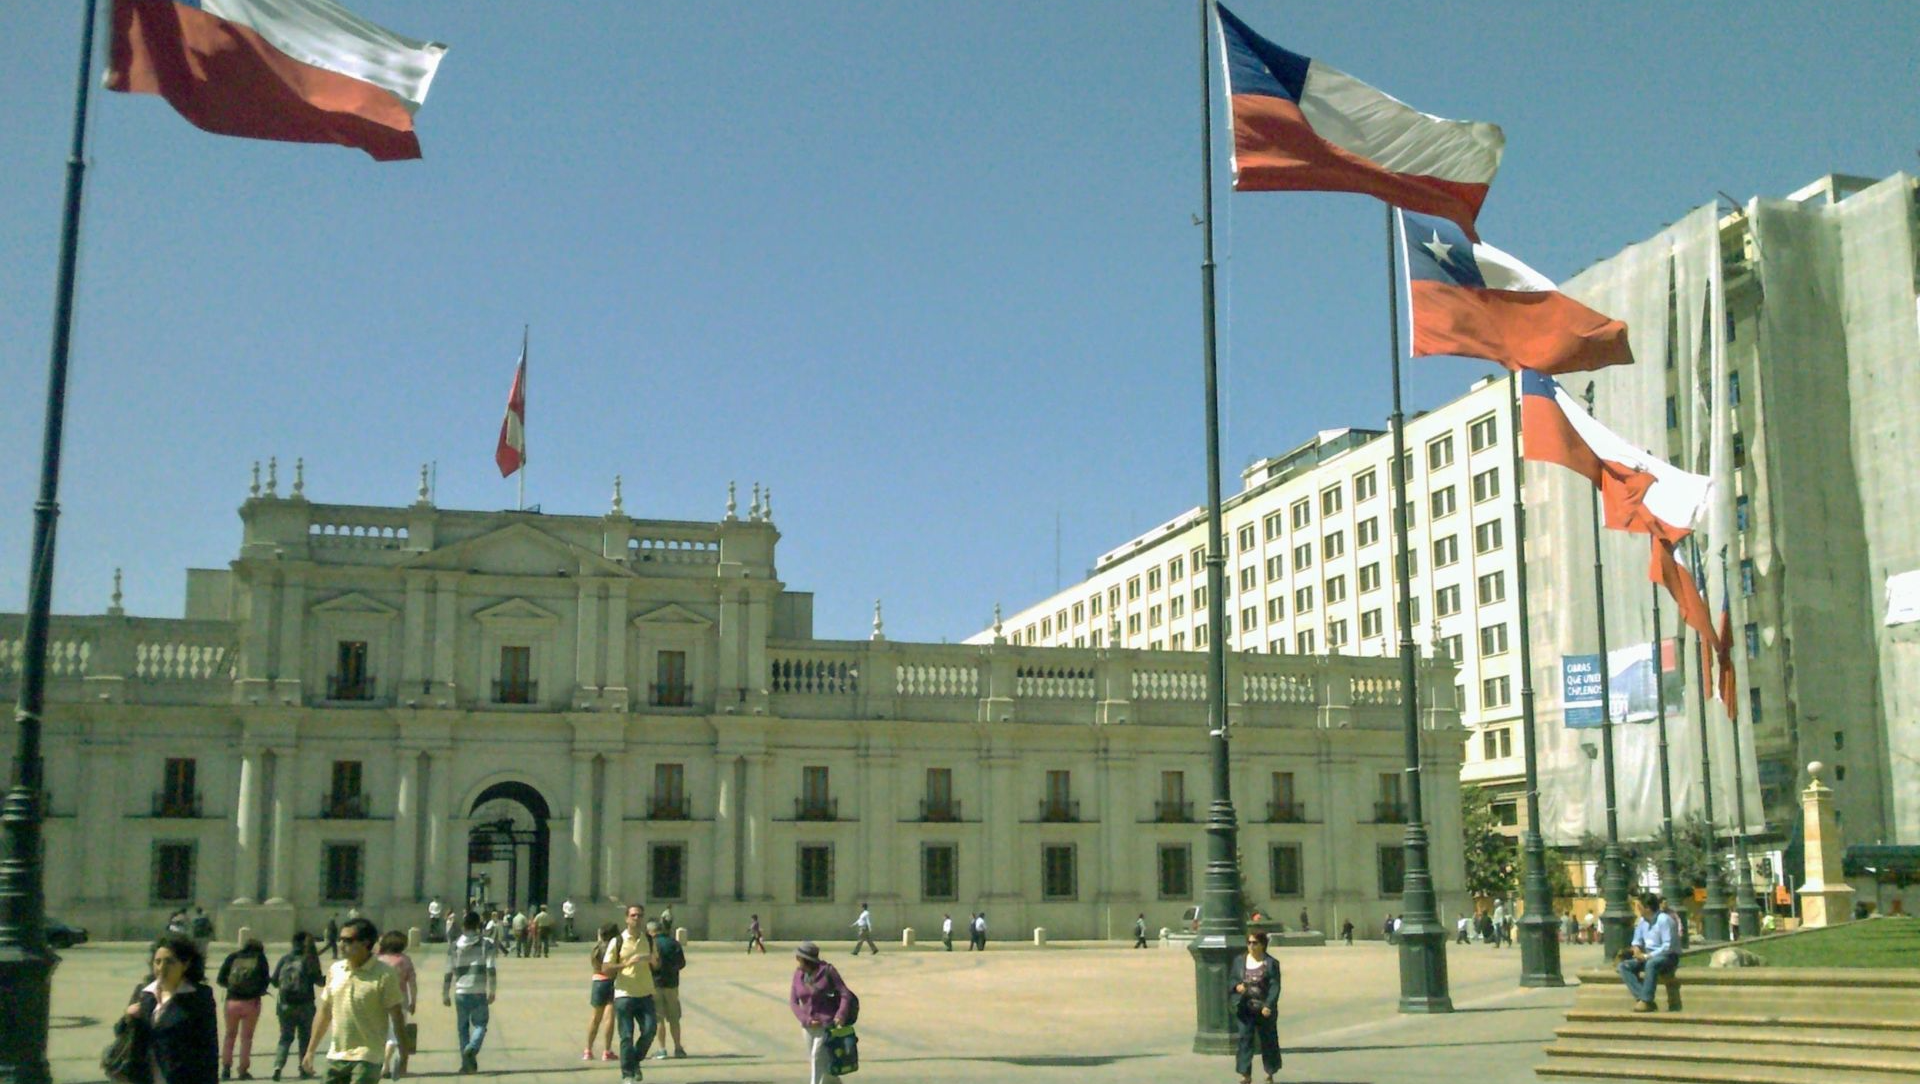 La Moneda goverment palace, flags and people walking